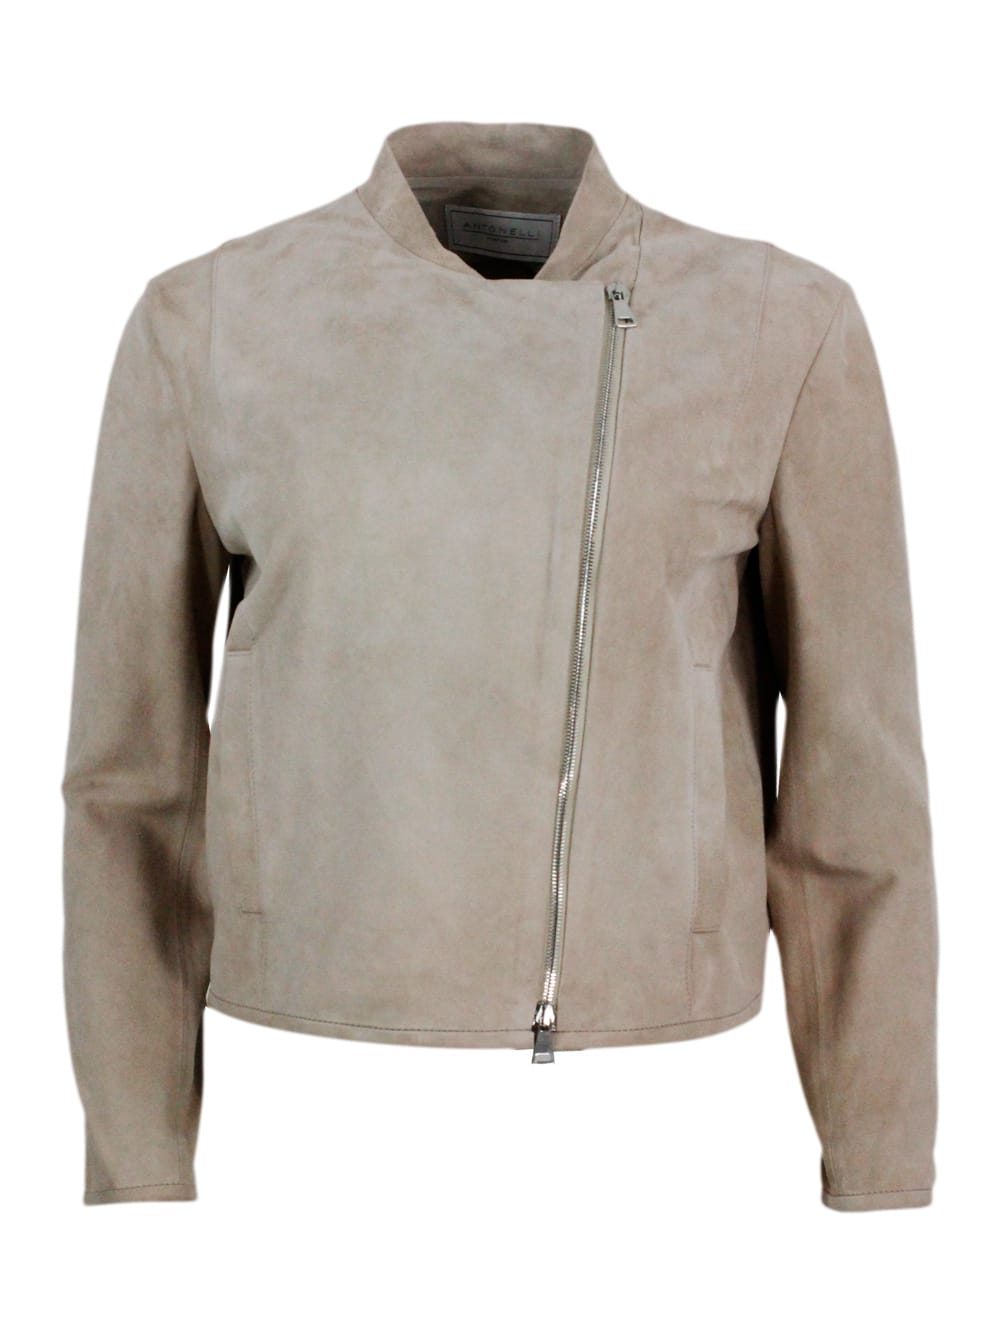 Biker Jacket Made Of Soft Suede. Side Zip Closure And Pockets On The Front